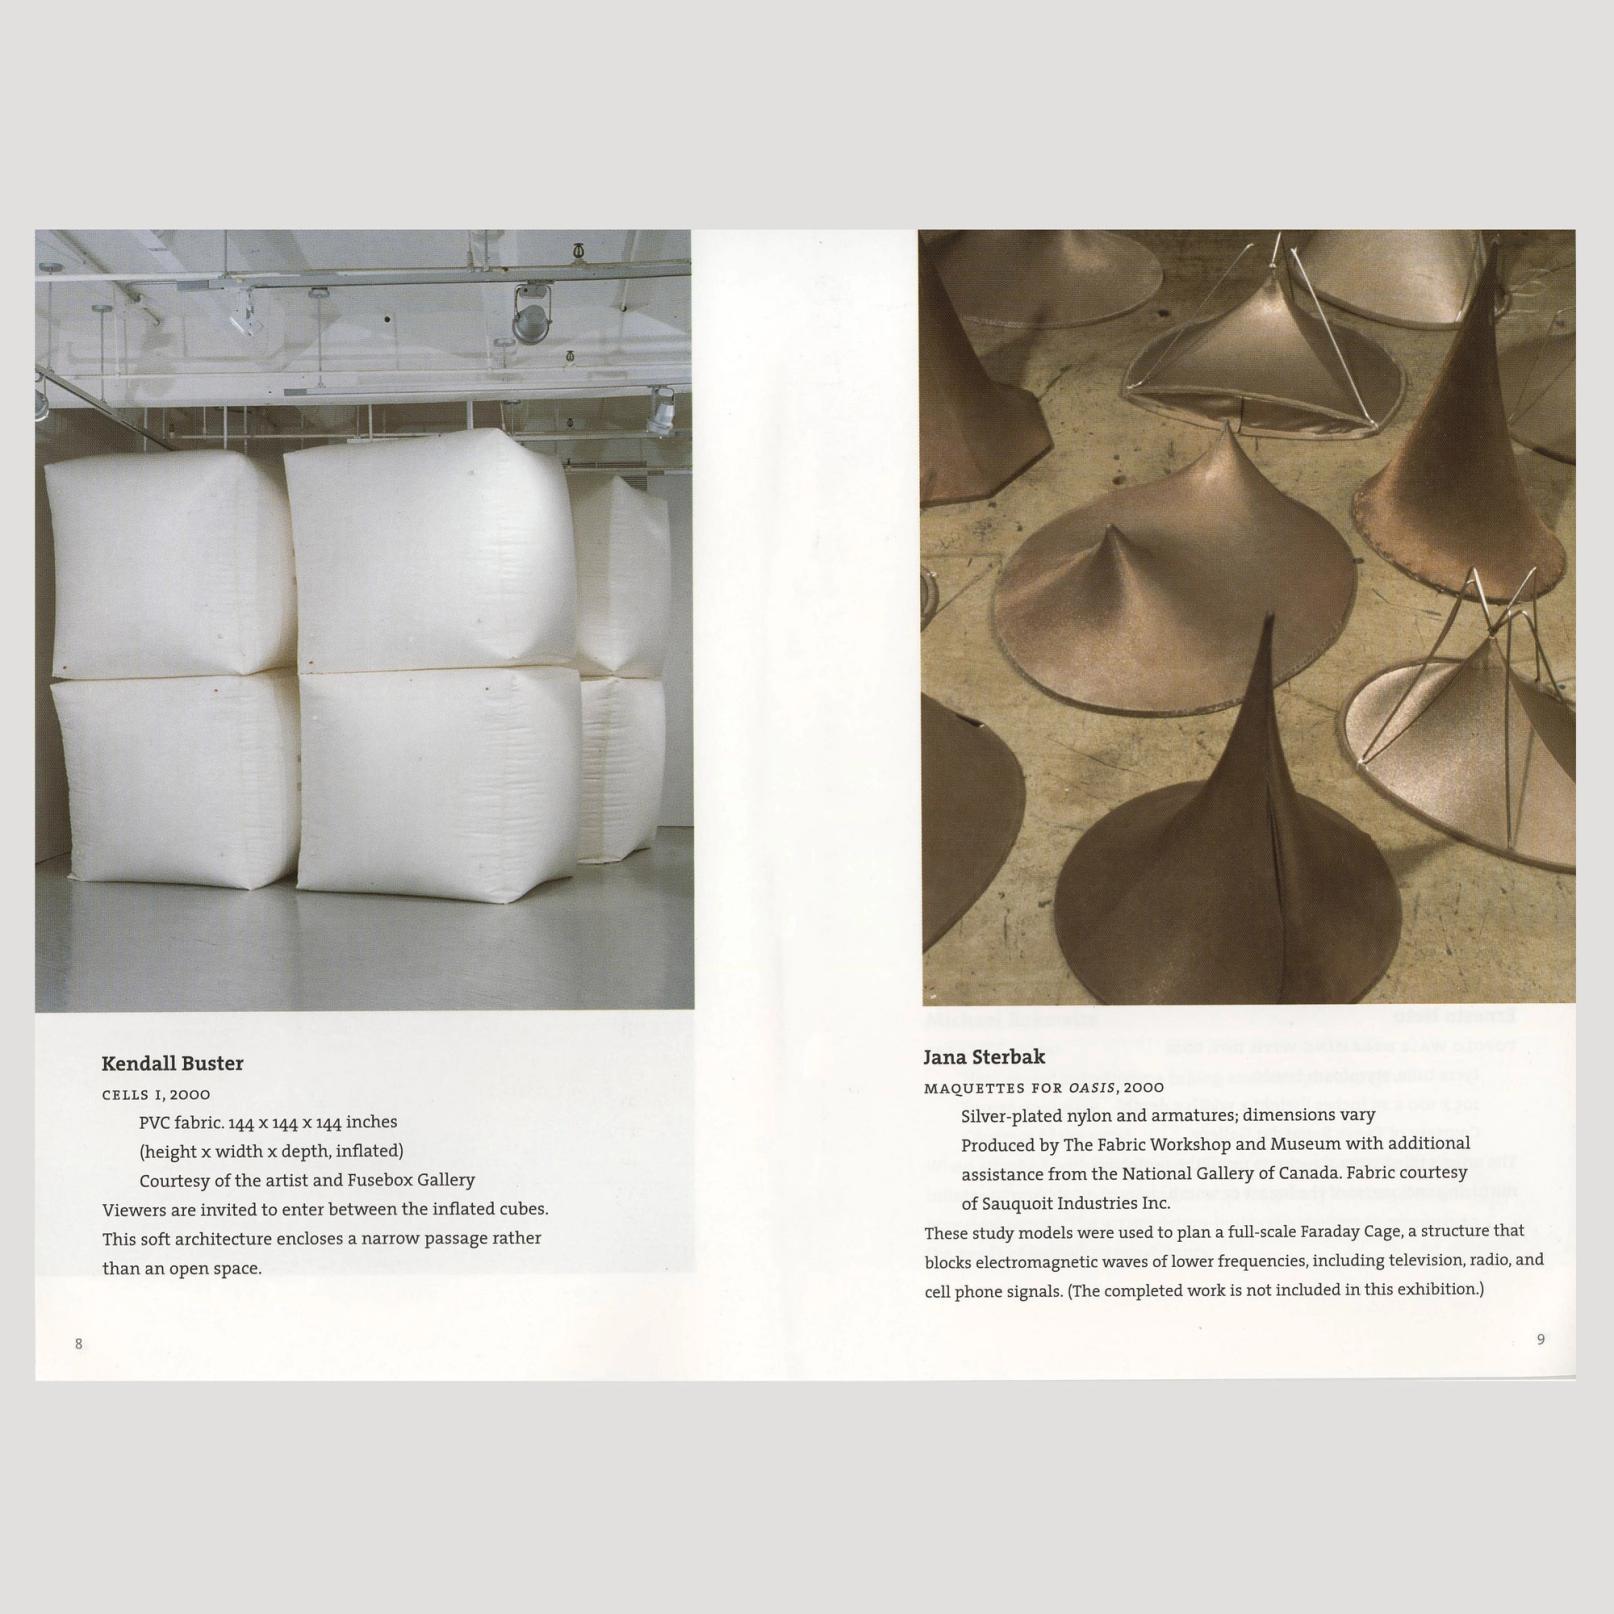 The image is of an open book spread. Both pages consist of one image each and their respective captions. In the image on the left, we can see six large white inflated cubes, all the same size, and they look like they are arranged in the shape of a cube. They are stacked two cubes high and reach to the ceiling of the gallery space they are in from the floor. The caption reads: "Kendall Buster CELLS I, 2000 PVC fabric. 144 x 144 x 144 inches (height x width x depth, inflated) Courtesy of the artist and Fusebox Gallery Viewers are invited to enter between the inflated cubes. This soft architecture encloses a narrow passage rather than an open space." On the right side, there are multiple golden soft sculptures made of nylon and wiring. The wiring gives them structure and shapes the nylon to have a round or oval bottom and stretches the center to one or two points. These sculptures are sitting on a scuffed, tan floor. The caption reads: "Jana Sterbak MAQUETTES FOR OASIS, 2000 Silver-plated nylon and armatures; dimensions vary Produced by The Fabric Workshop and Museum with additional assistance from the National Gallery of Canada. Fabric courtesy of Sauquoit Industries Inc. These study models were used to plan a full-scale Faraday Cage, a structure that blocks electromagnetic waves of lower frequencies, including television, radio, and cell phone signals. (The completed work is not included in this exhibition.)"